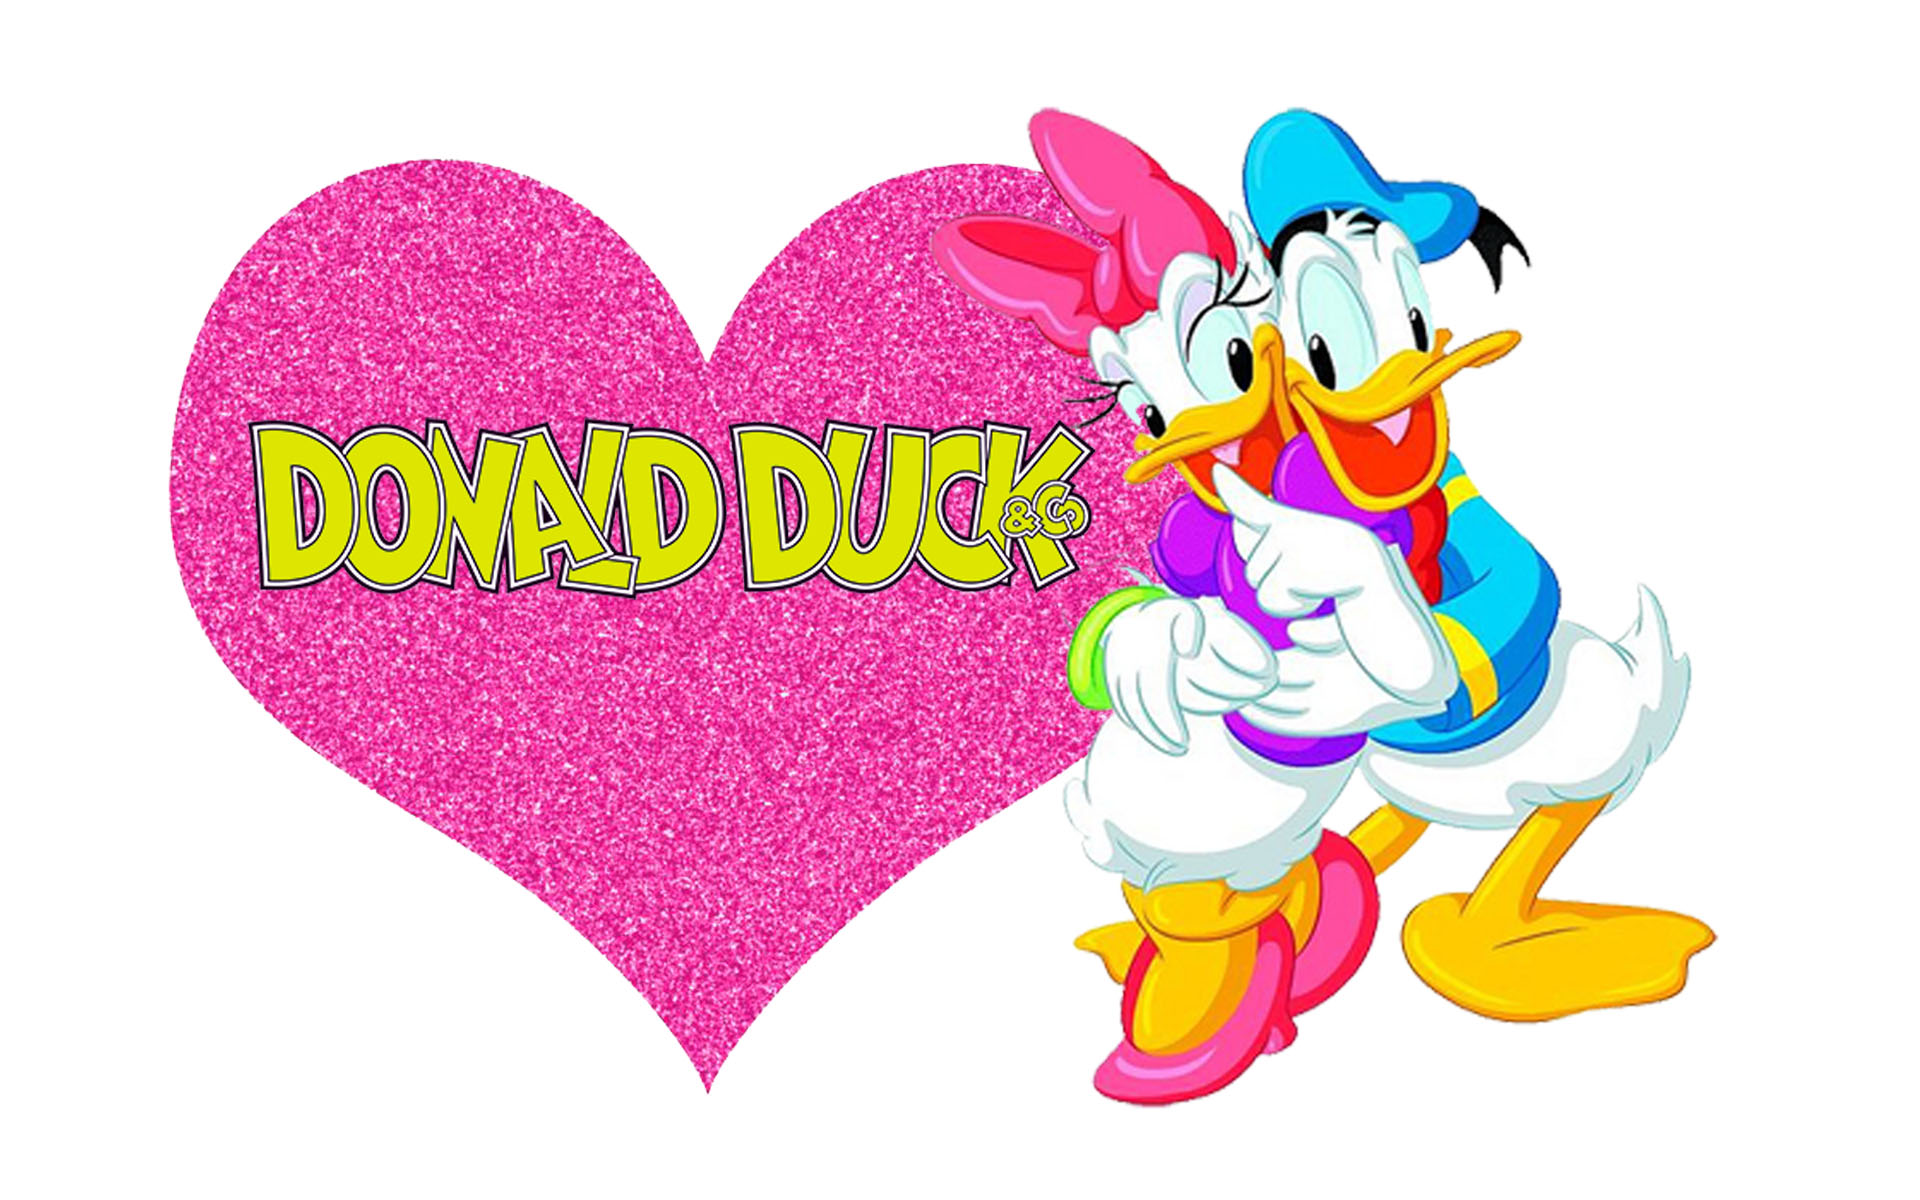 Donald Duck And Daisy Duck In Love Hd Wallpaper 1920x1200.